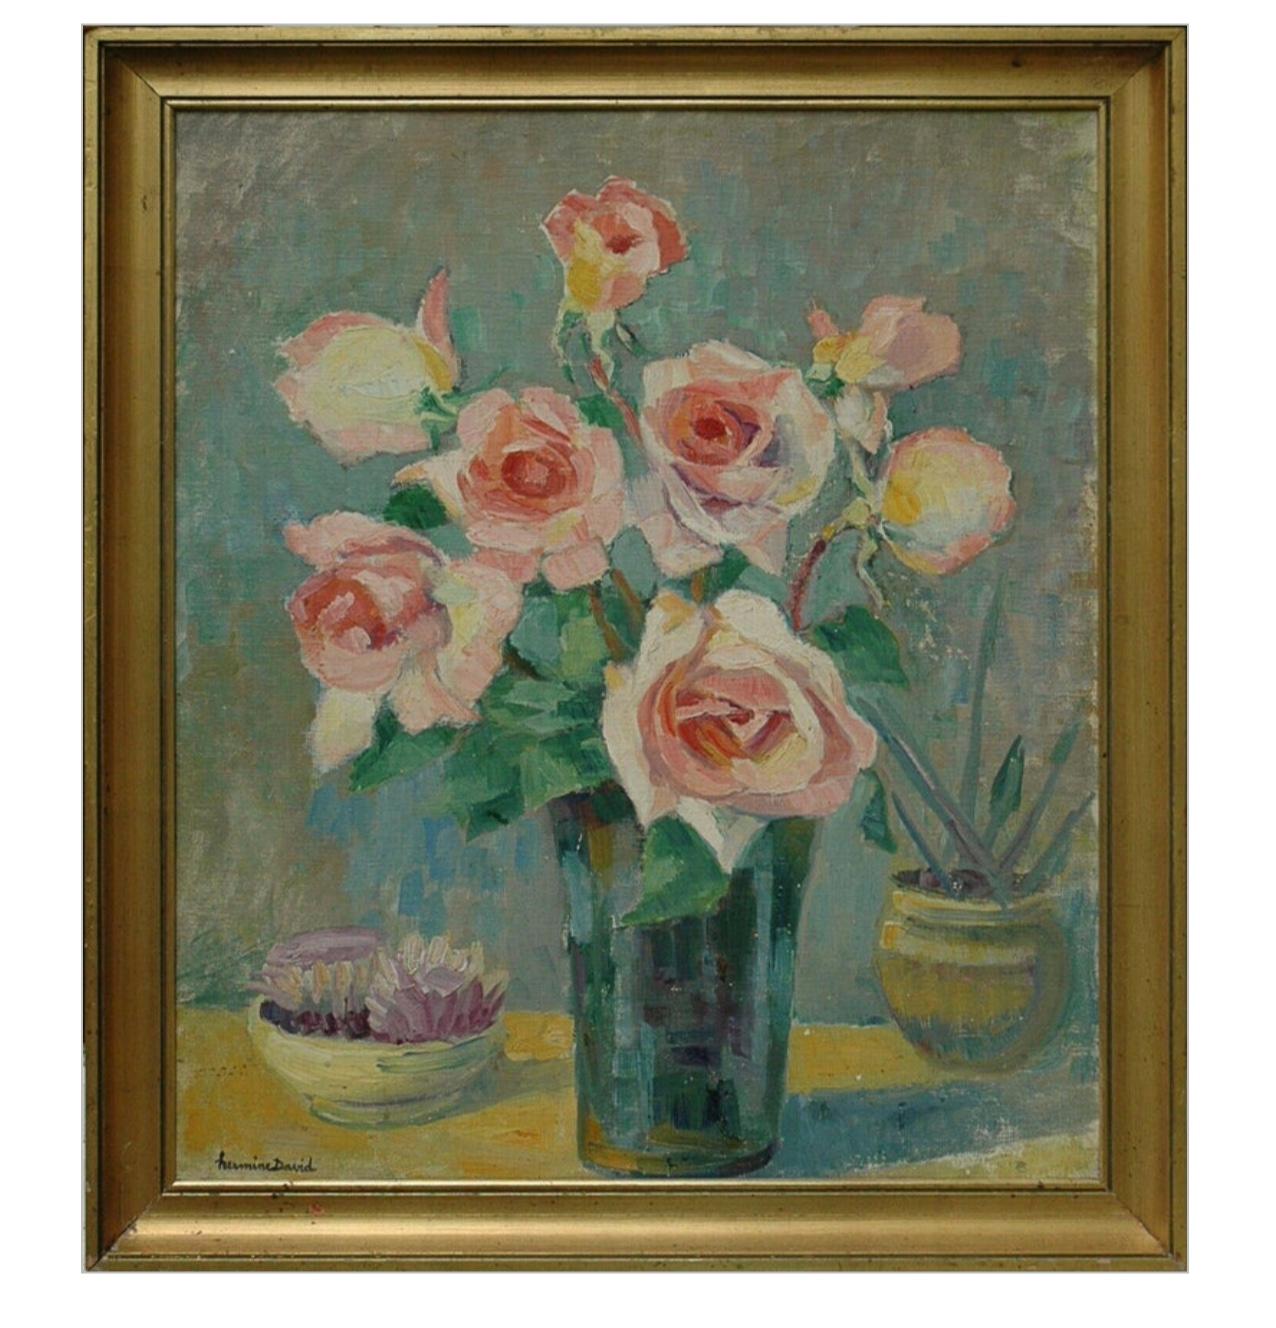 Bouquet of roses by Hermine David, oil on cardboard linen, signed. Framed.

Hermine Lionette Cartan David (19 April 1886 in Paris – 1 December 1970 in Bry-sur-Marne) was a French painter and the wife of Jules Pascin, also a painter.

She became